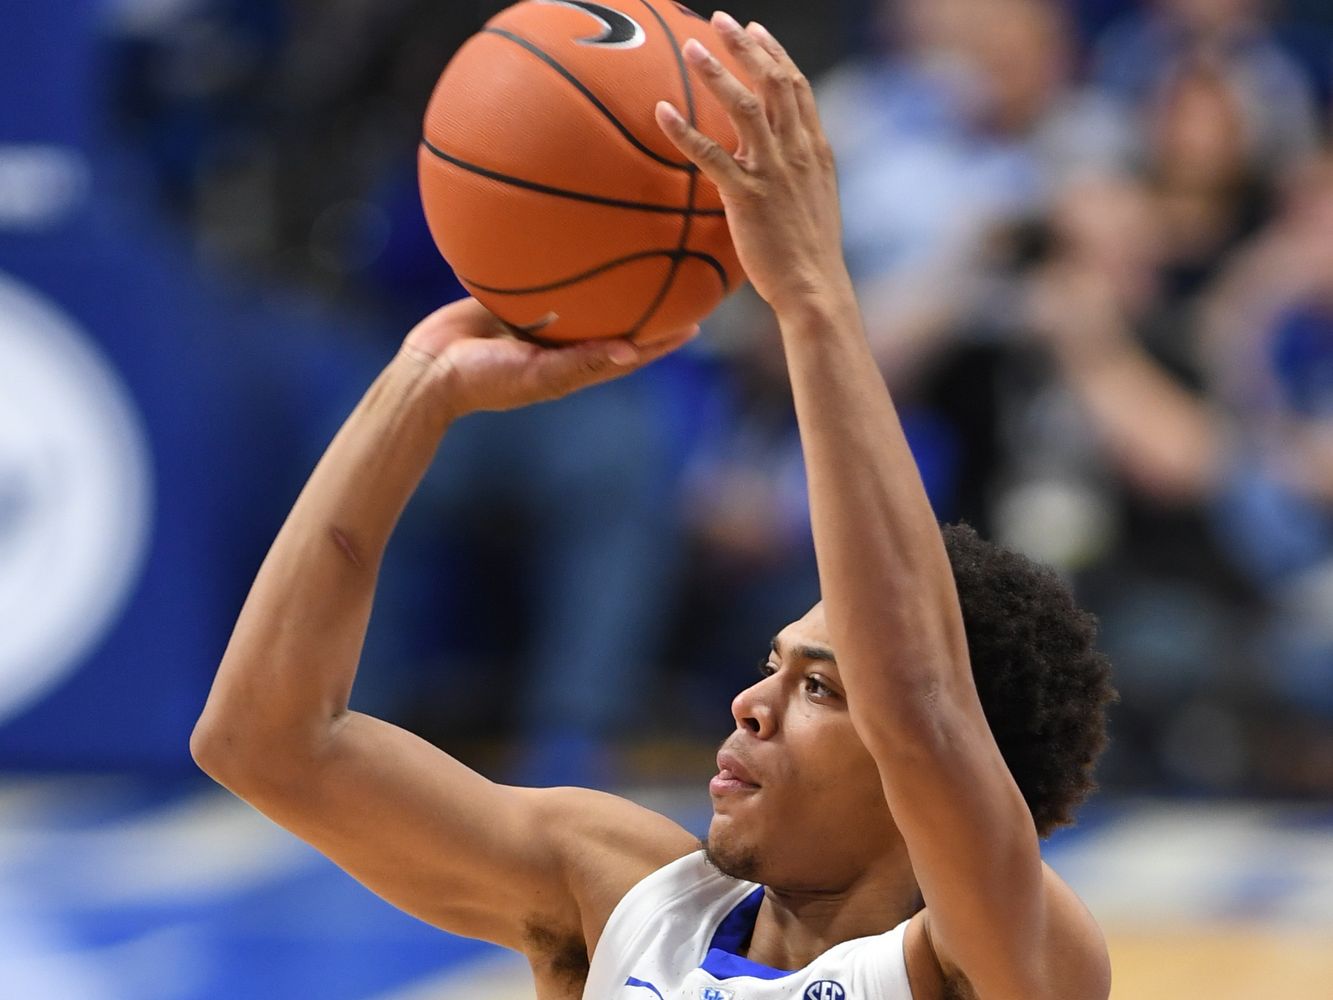 Shaky win over Southern Illinois leaves No. 2 Kentucky with even more questions to answer | USA ...